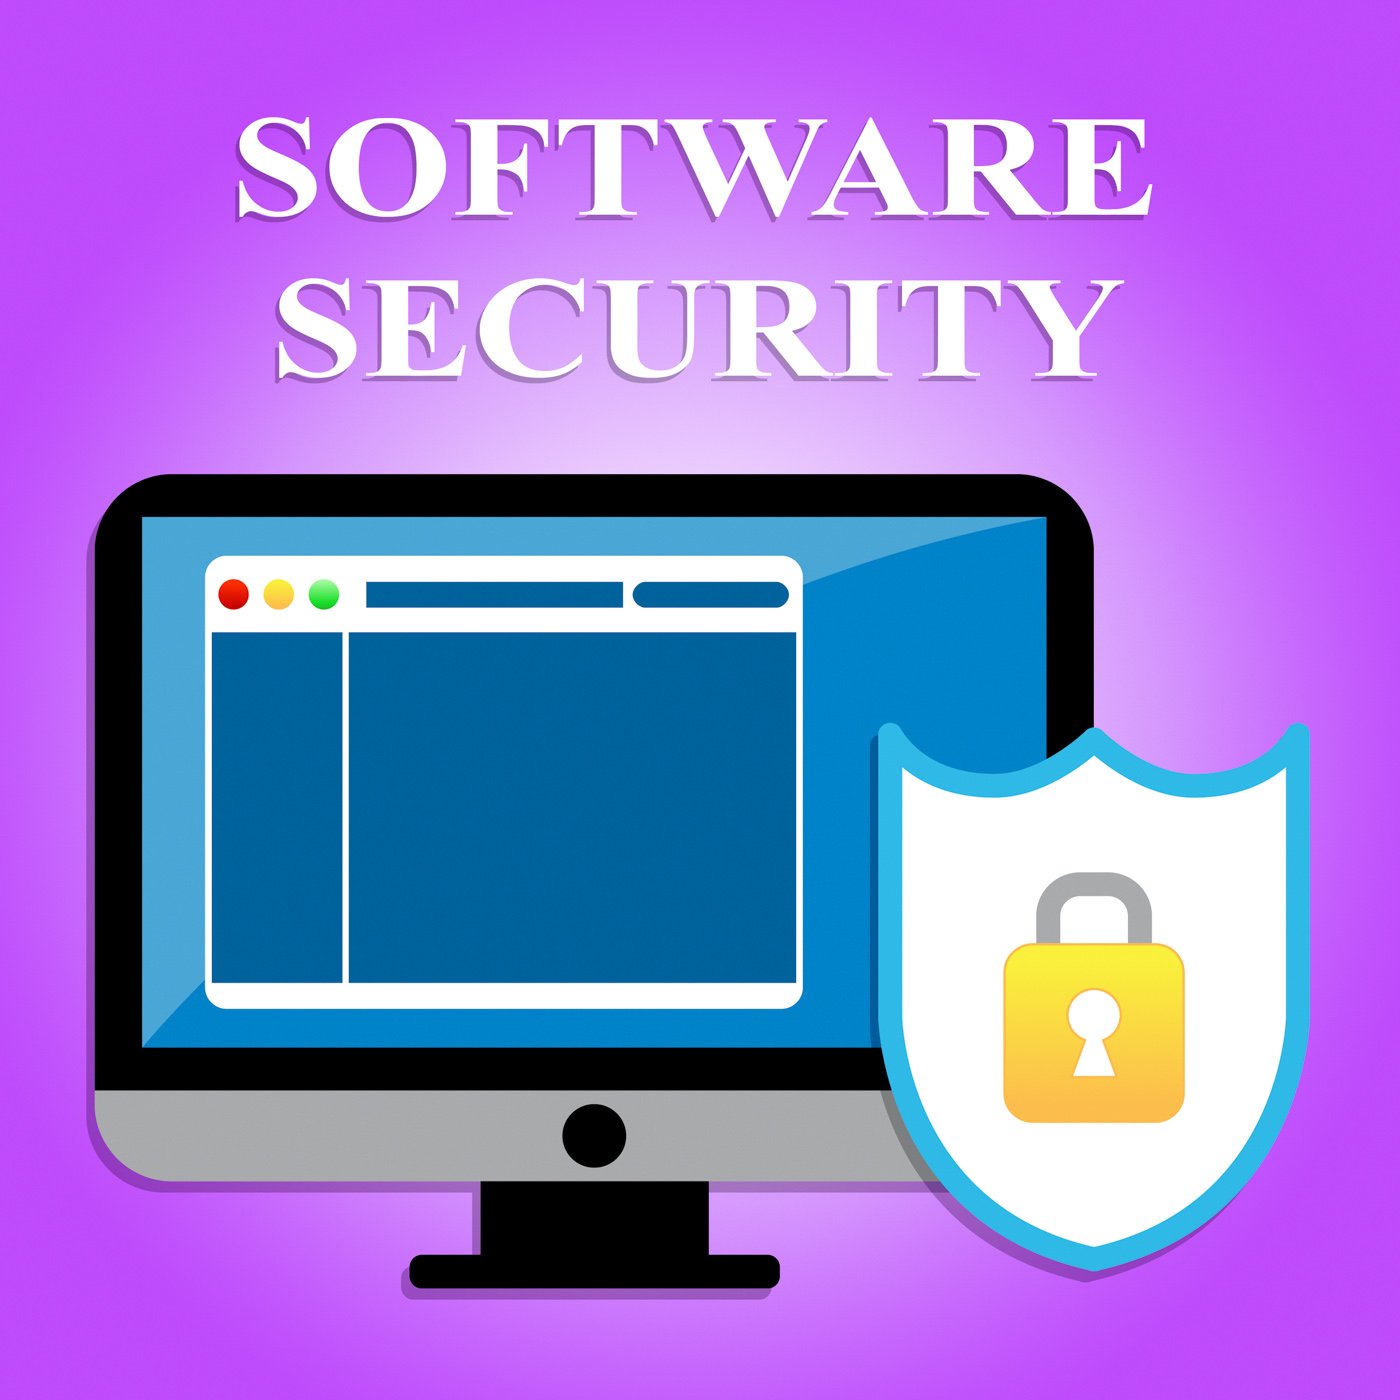 Software security indicates web site and application photo